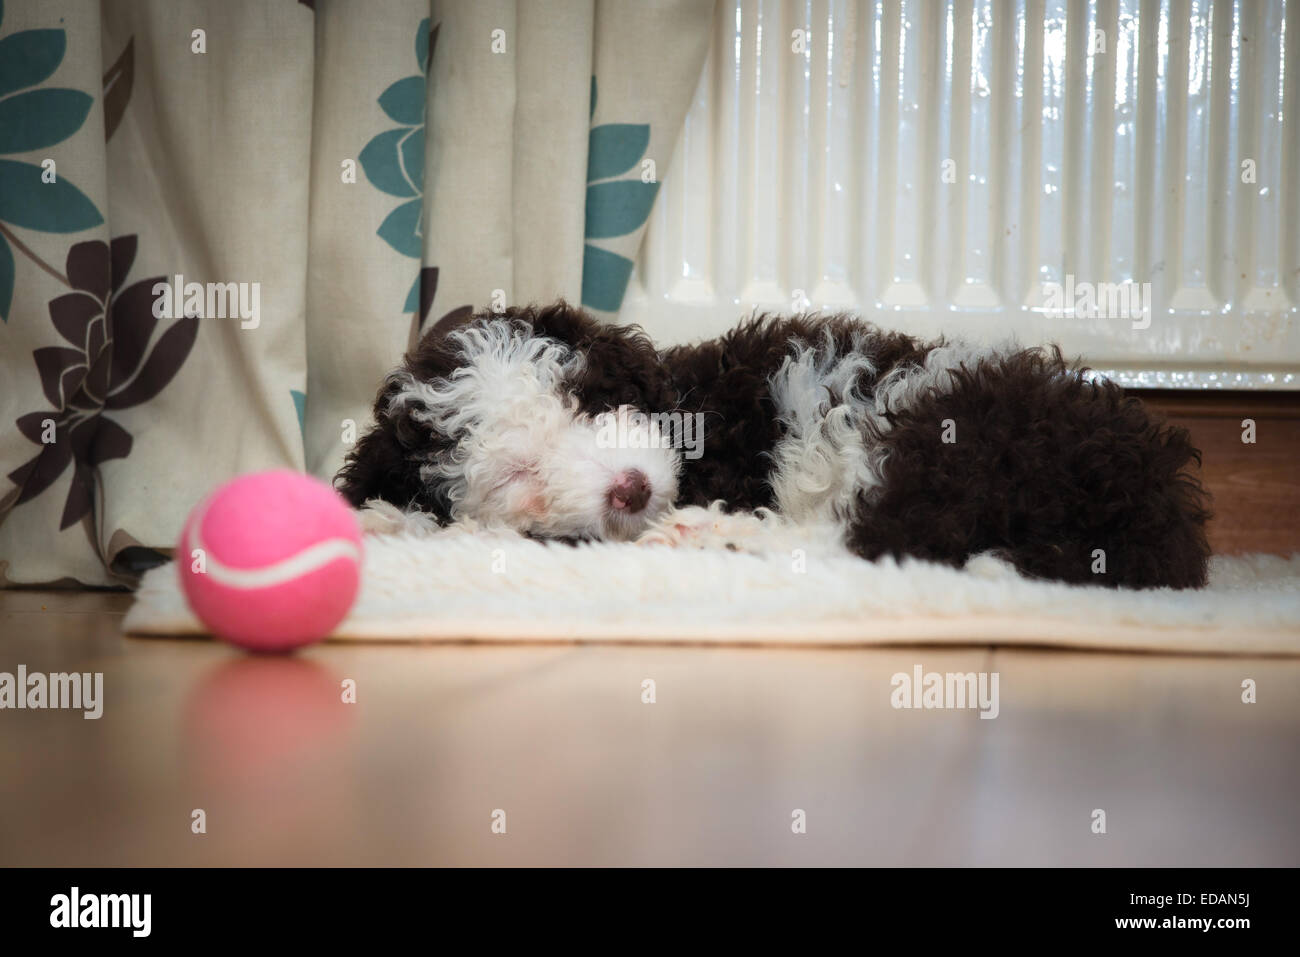 Spanish water dog puppy sleeping with ball in foreground Stock Photo